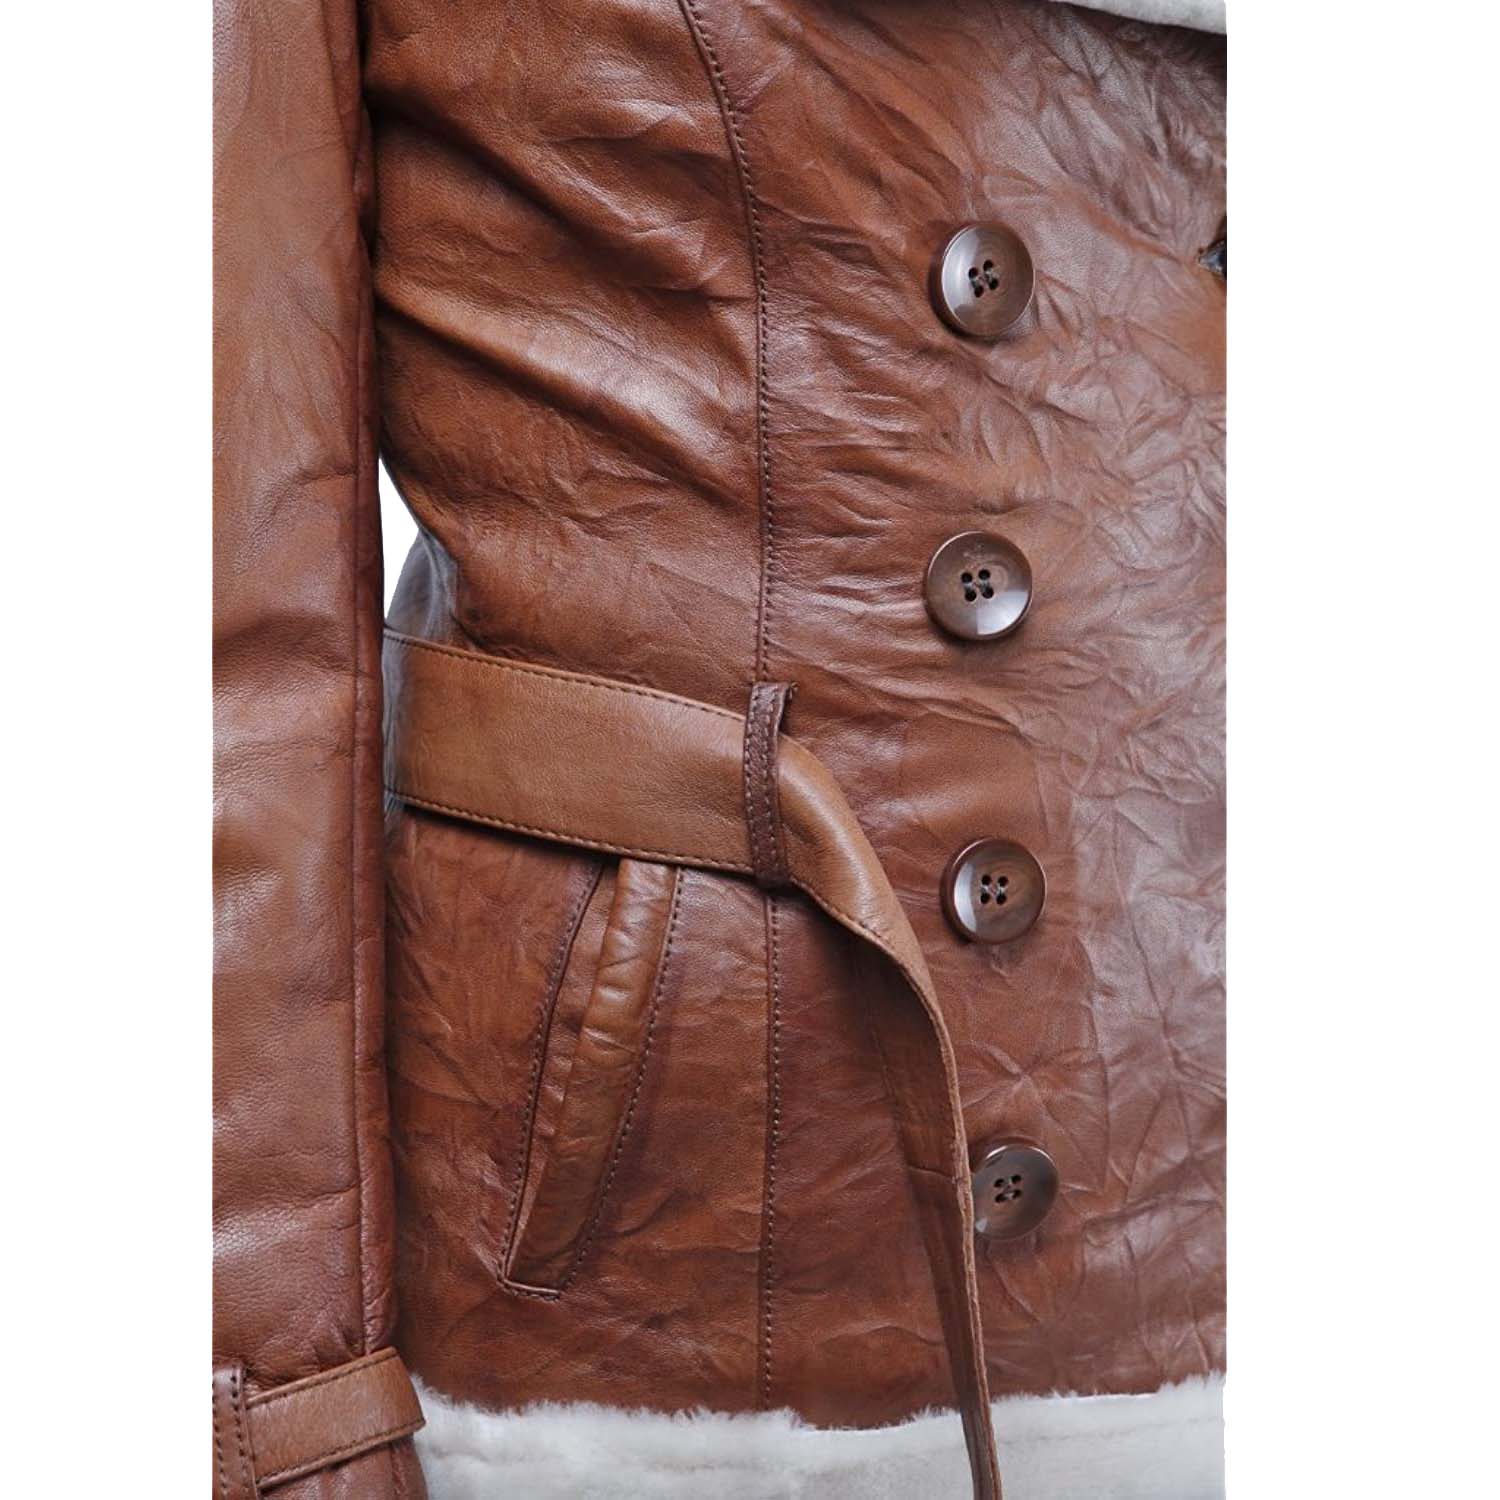 Women’s Tan Double Breasted Real Shearling Leather Jacket